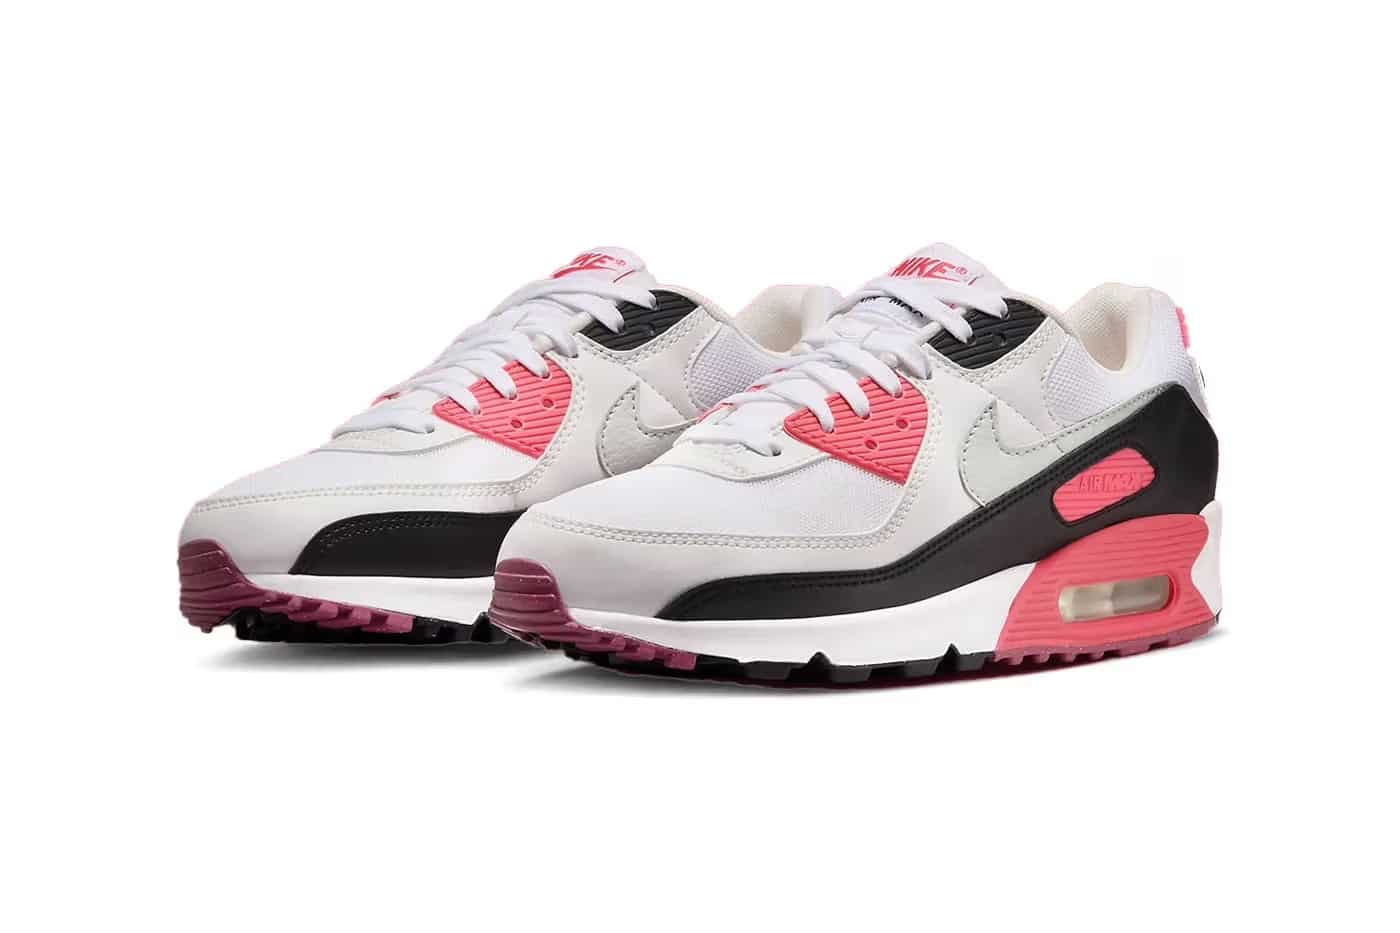 preview nike air max 90 aster pink dh8010 105 4